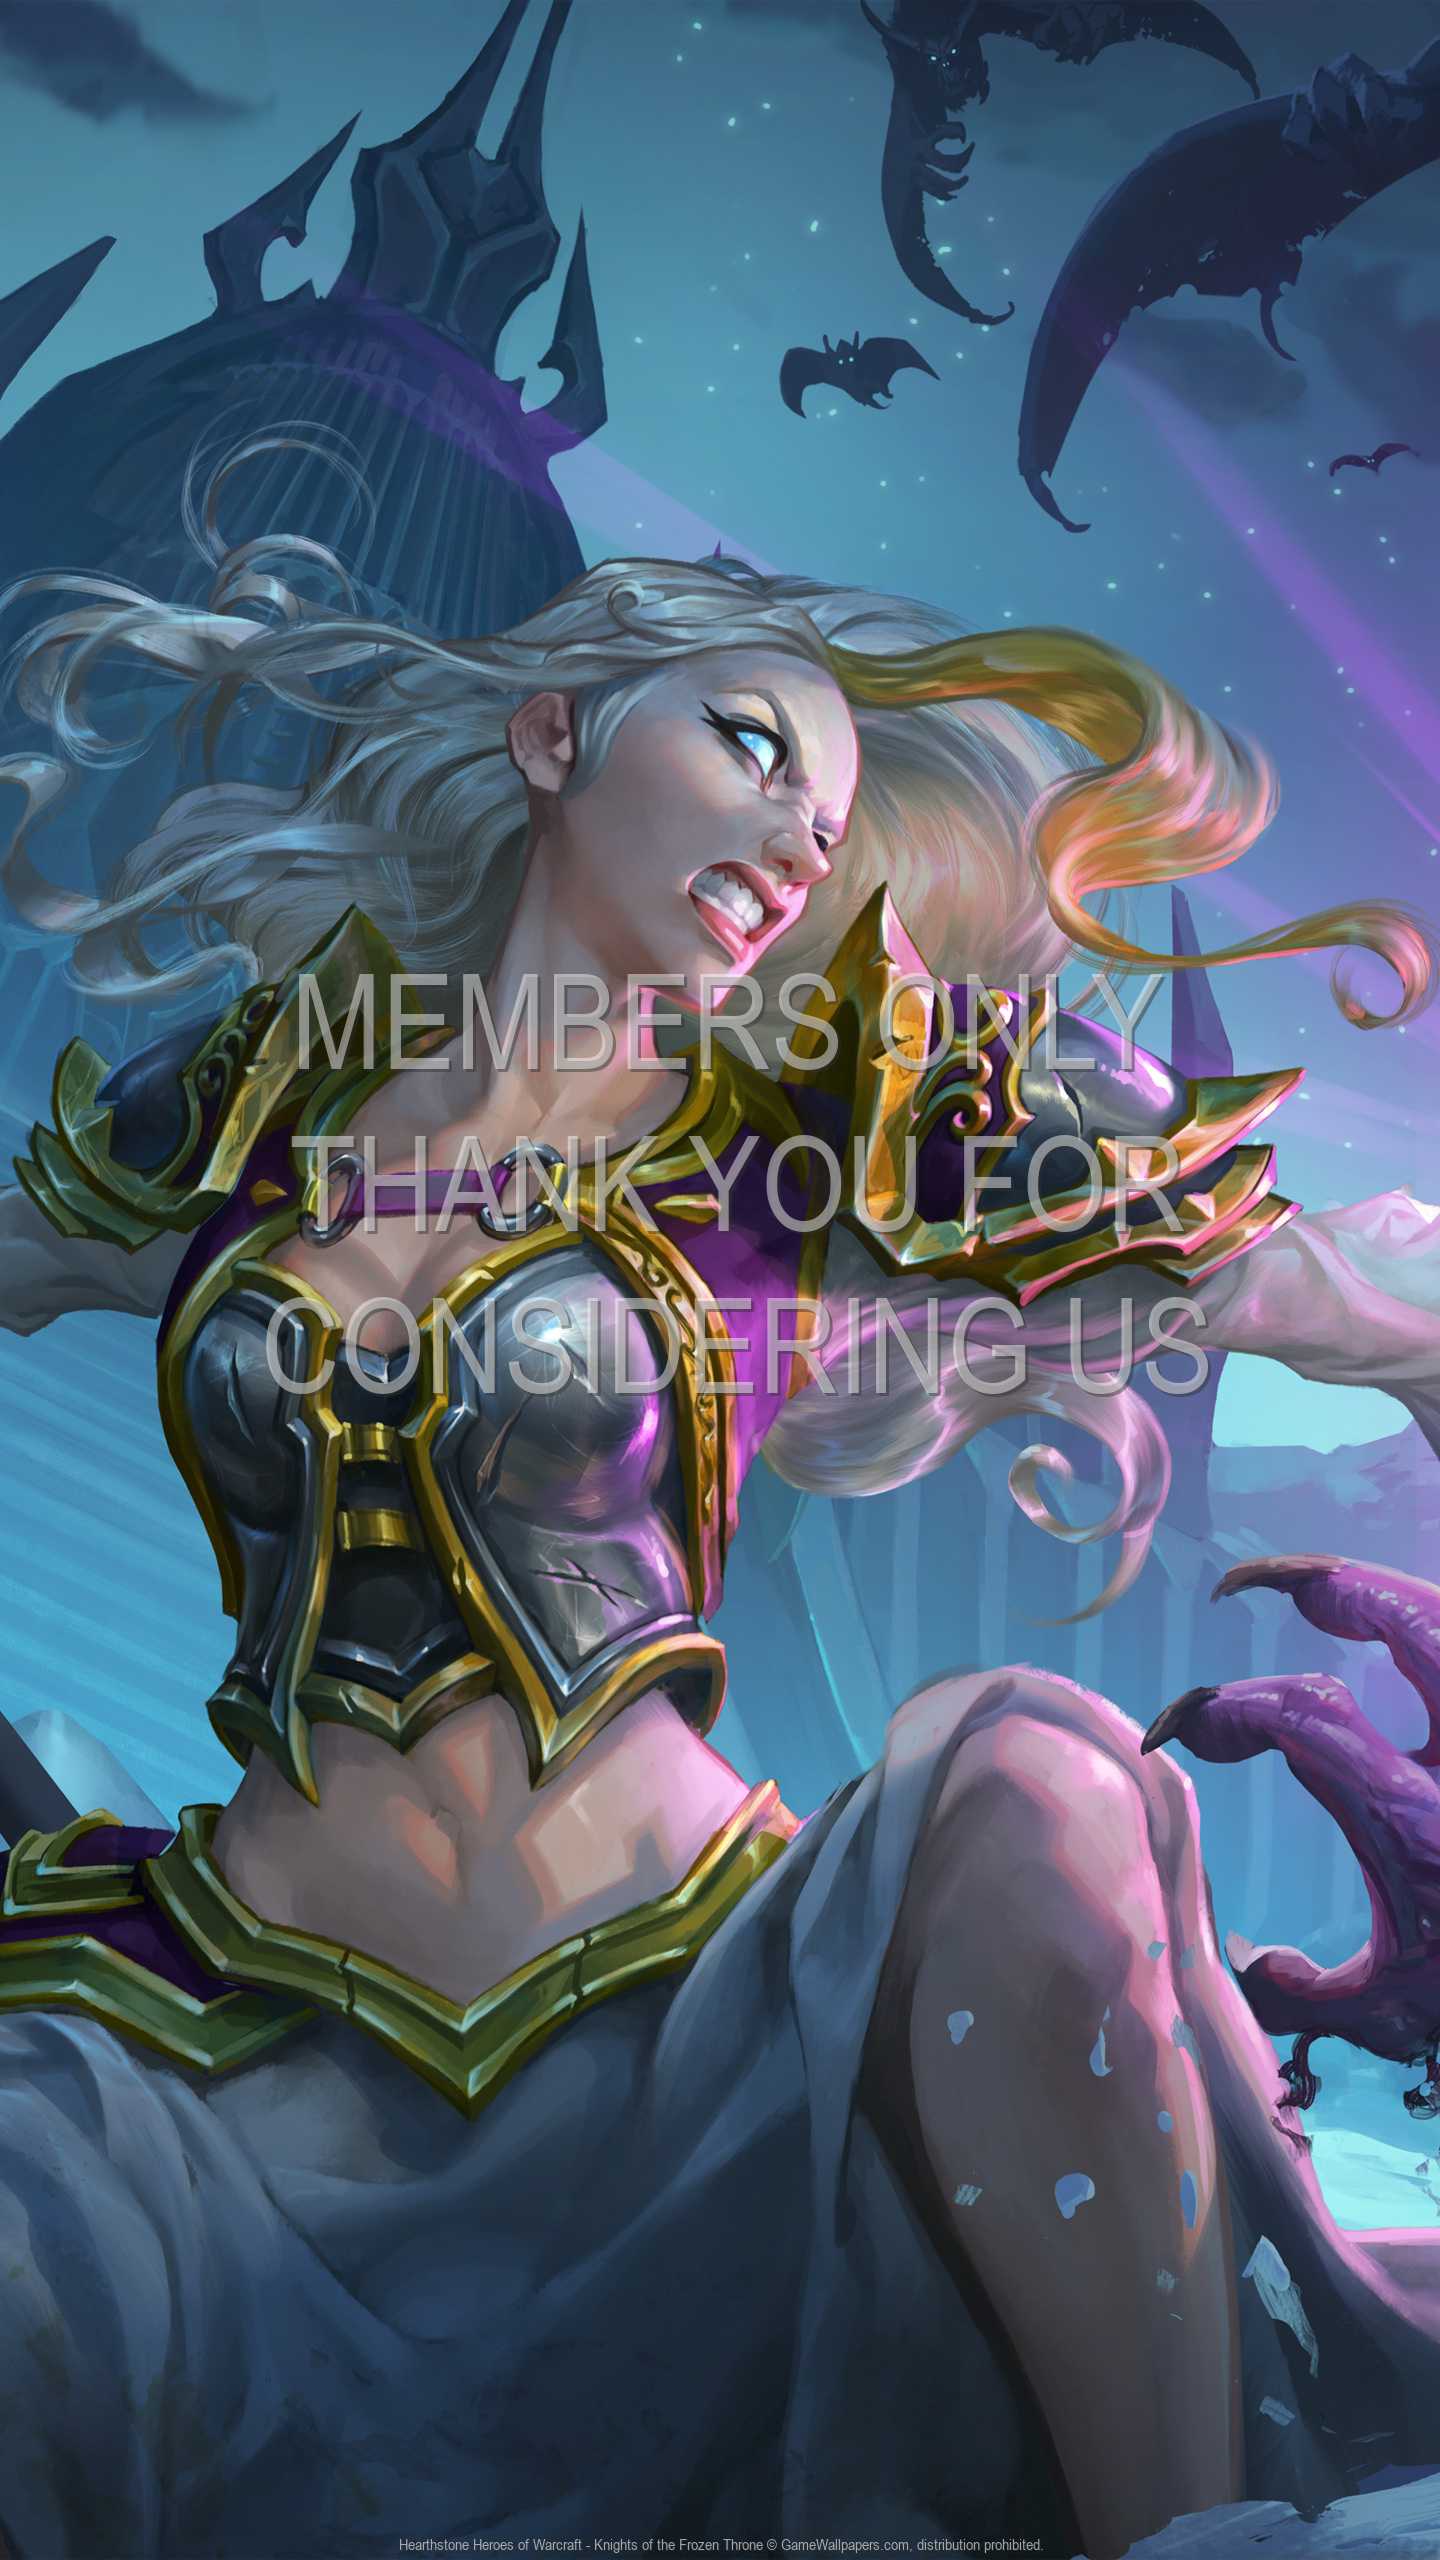 Hearthstone: Heroes of Warcraft - Knights of the Frozen Throne 1440p Vertical Mobiele achtergrond 01